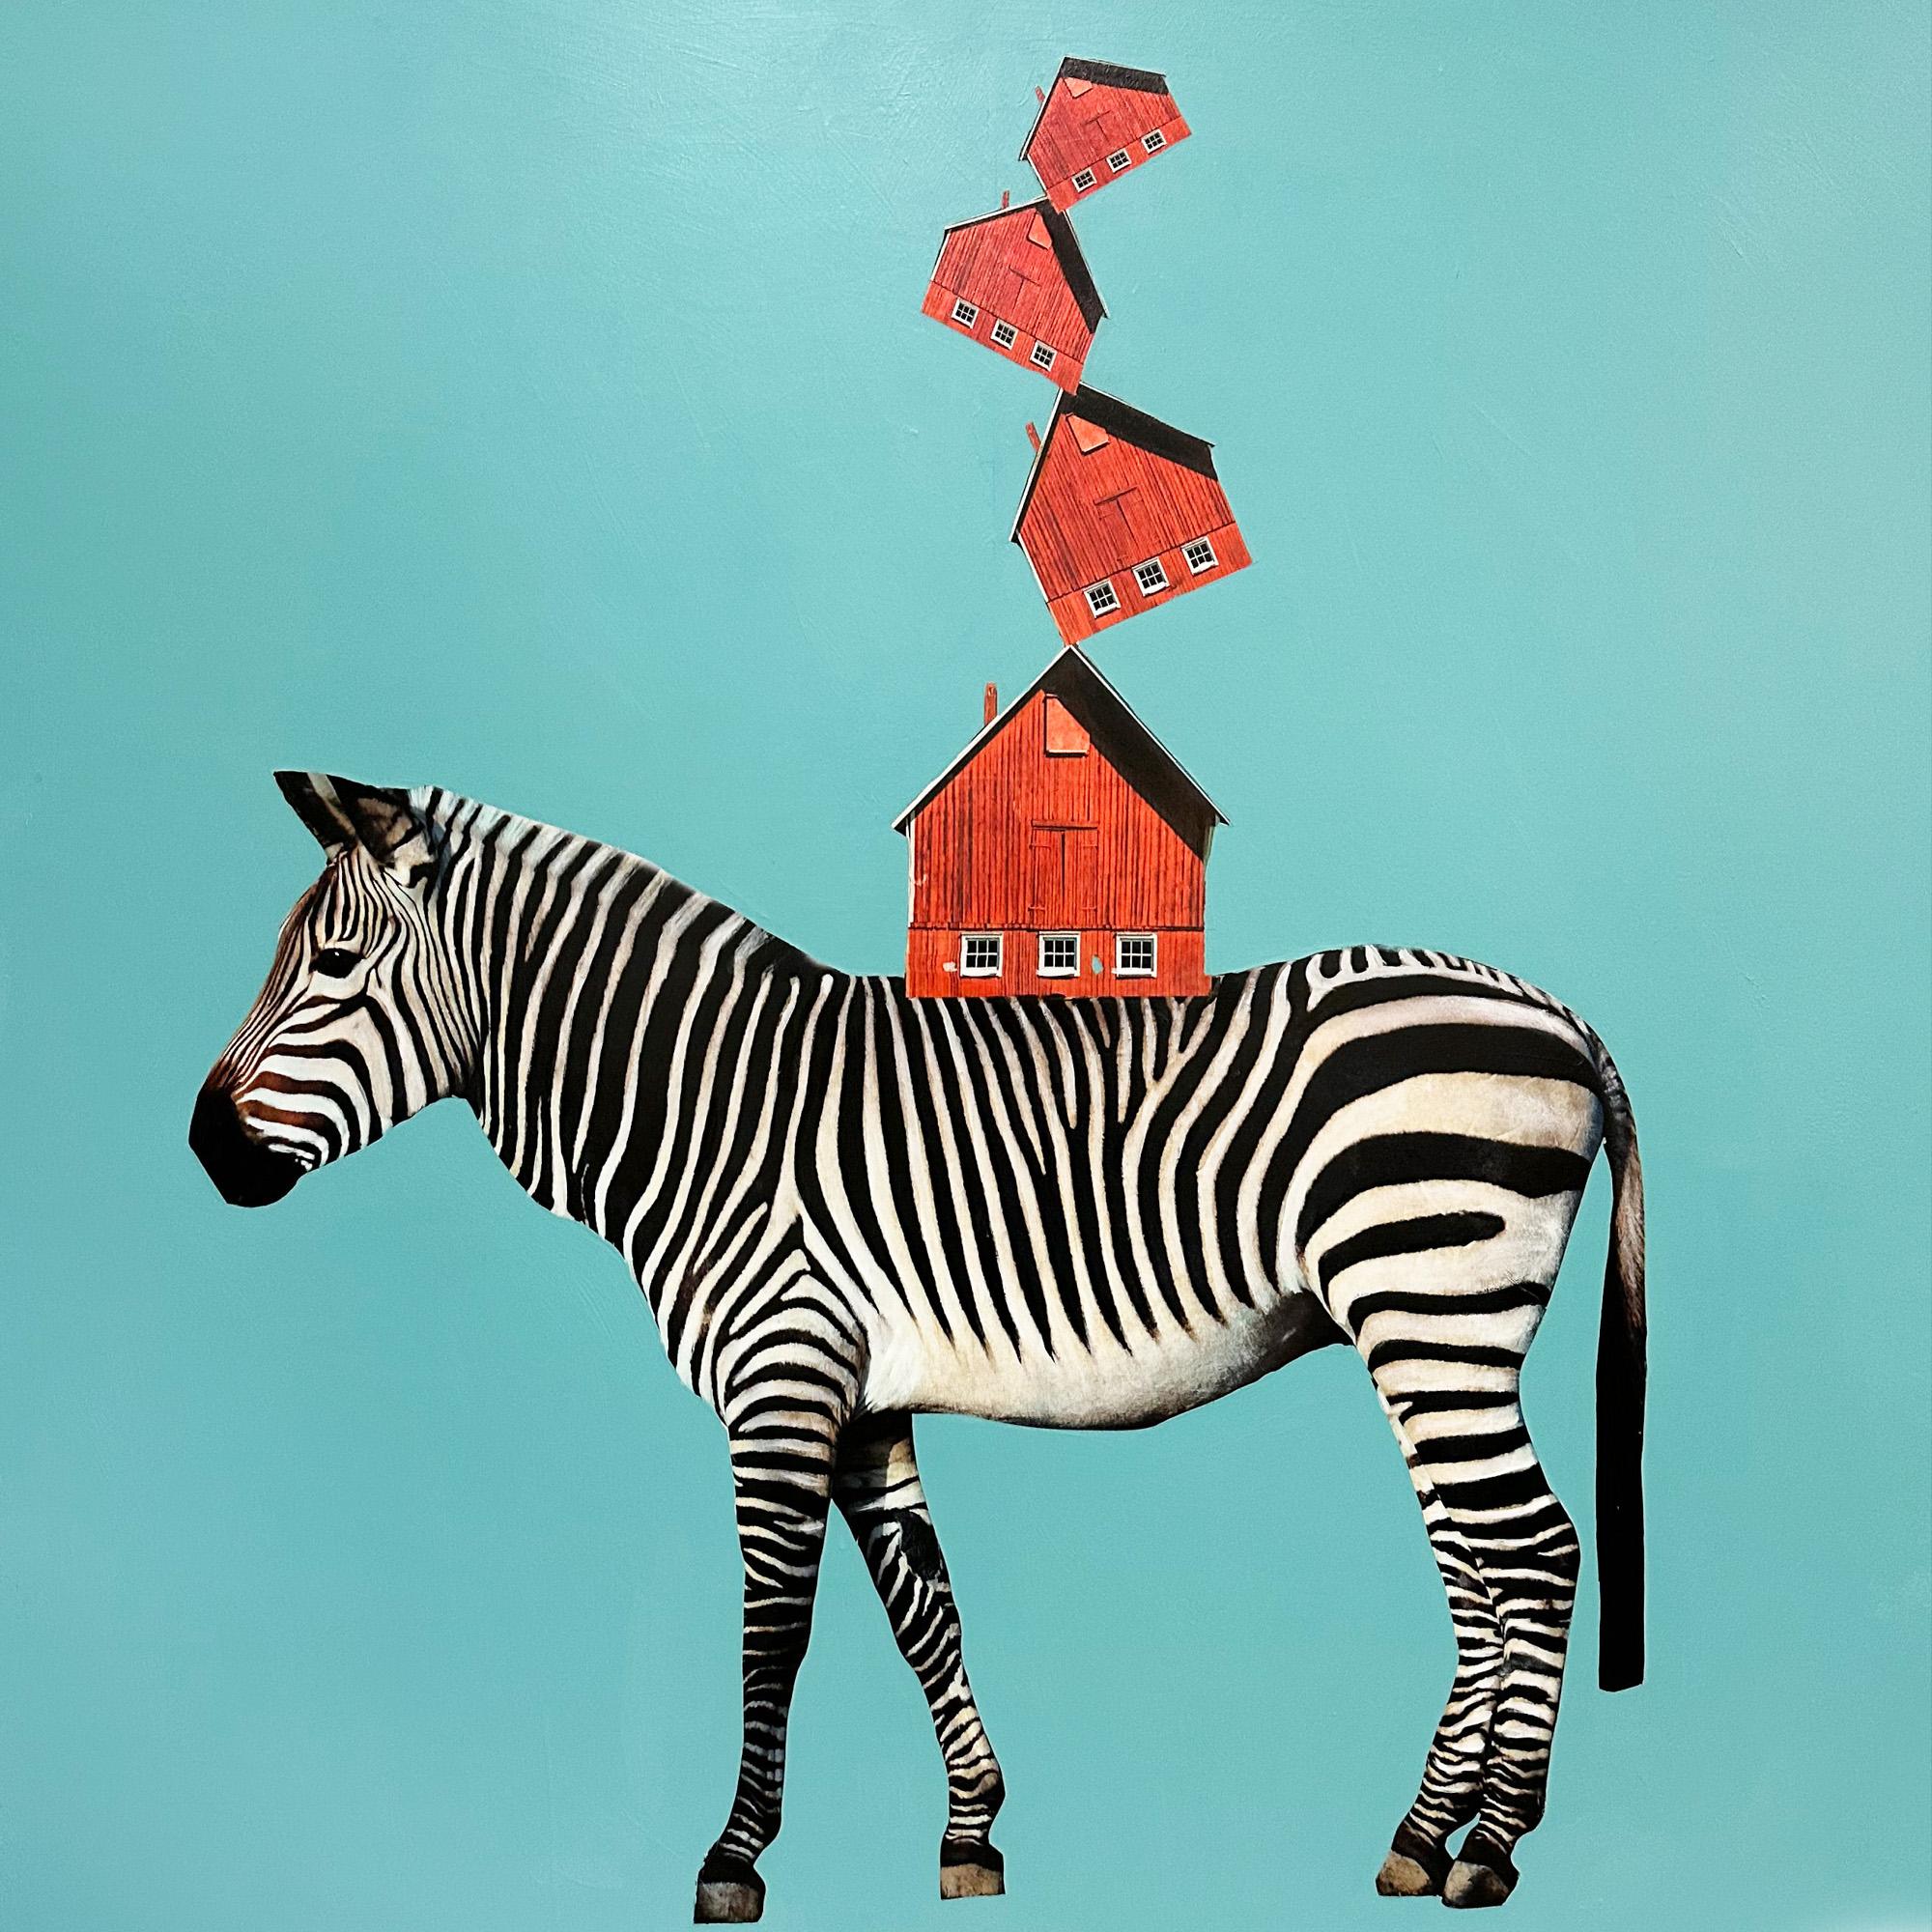 "Zebra Stack" Contemporary Animal Abstract Collaged Mixed Media on Panel - Mixed Media Art by Anke Schofield